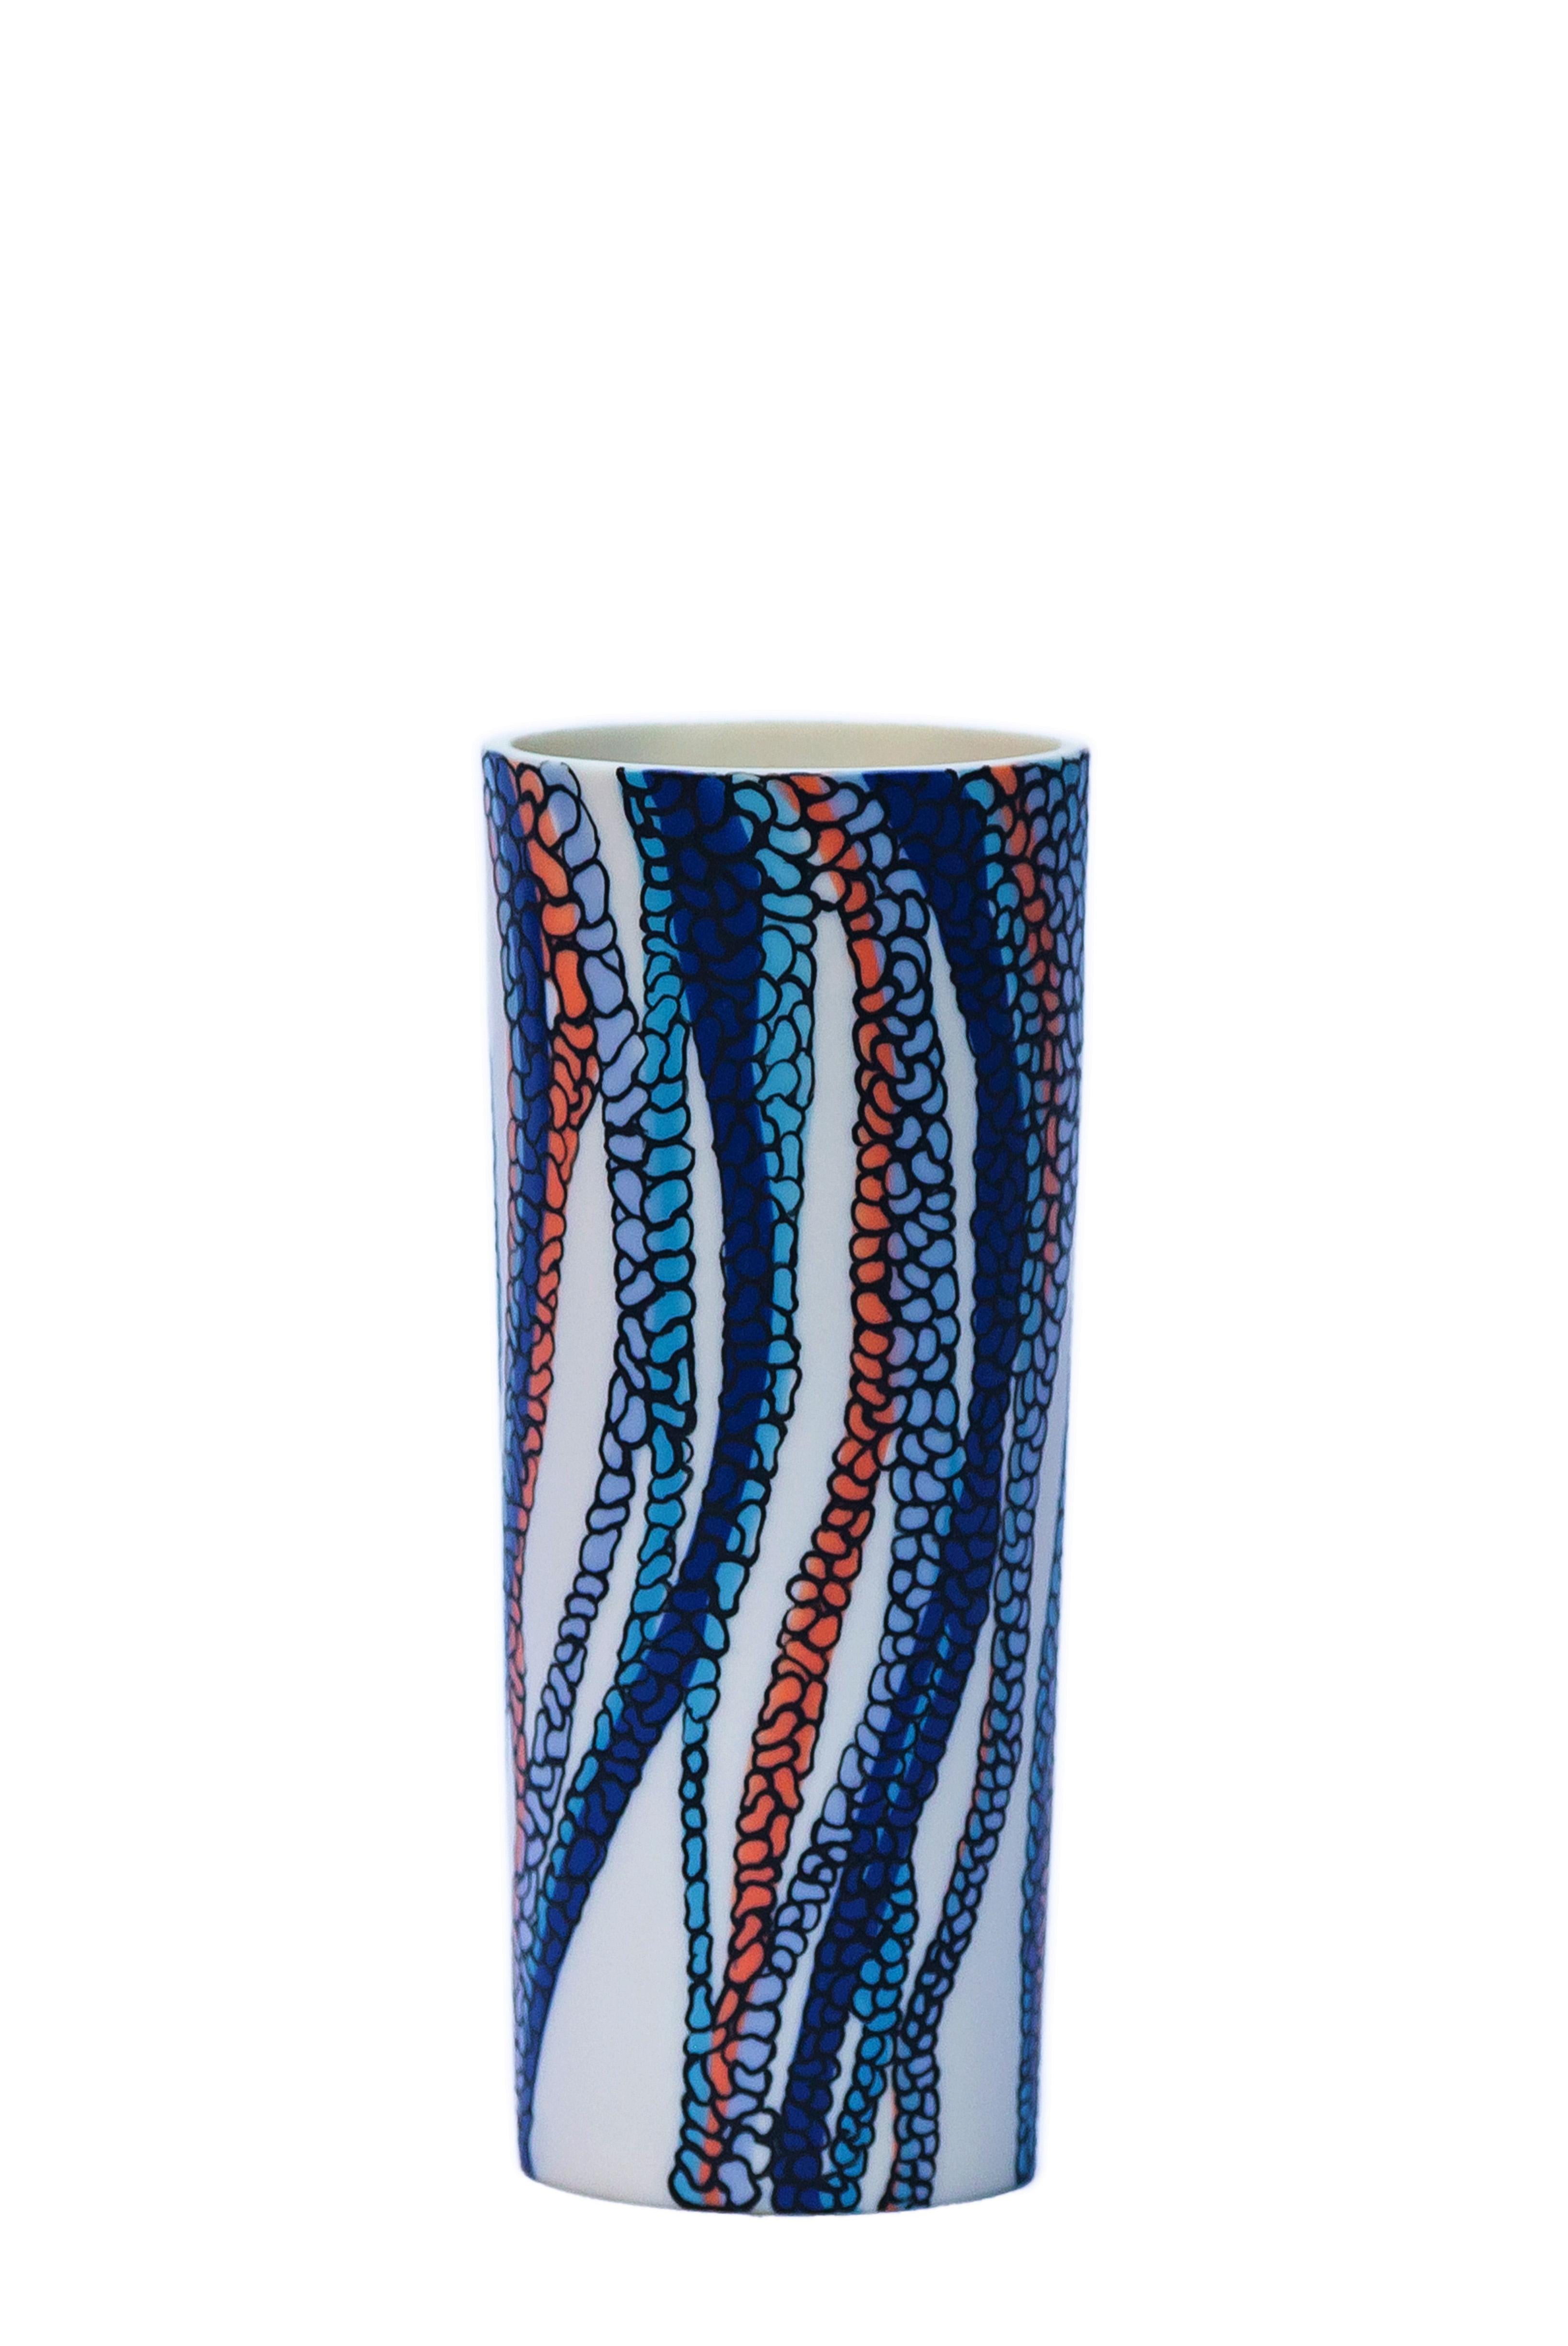 “Dripping Beans”, 2020 Porcelain vase by Eugenio Michelini - Parian ware, dripping stained slips, Satin and hand decorated with overglaze. Size = 8 x 18cm h
Unique piece handmade 3 firings 

The focus of Eugenio Michelini (Italy, 1970) interest